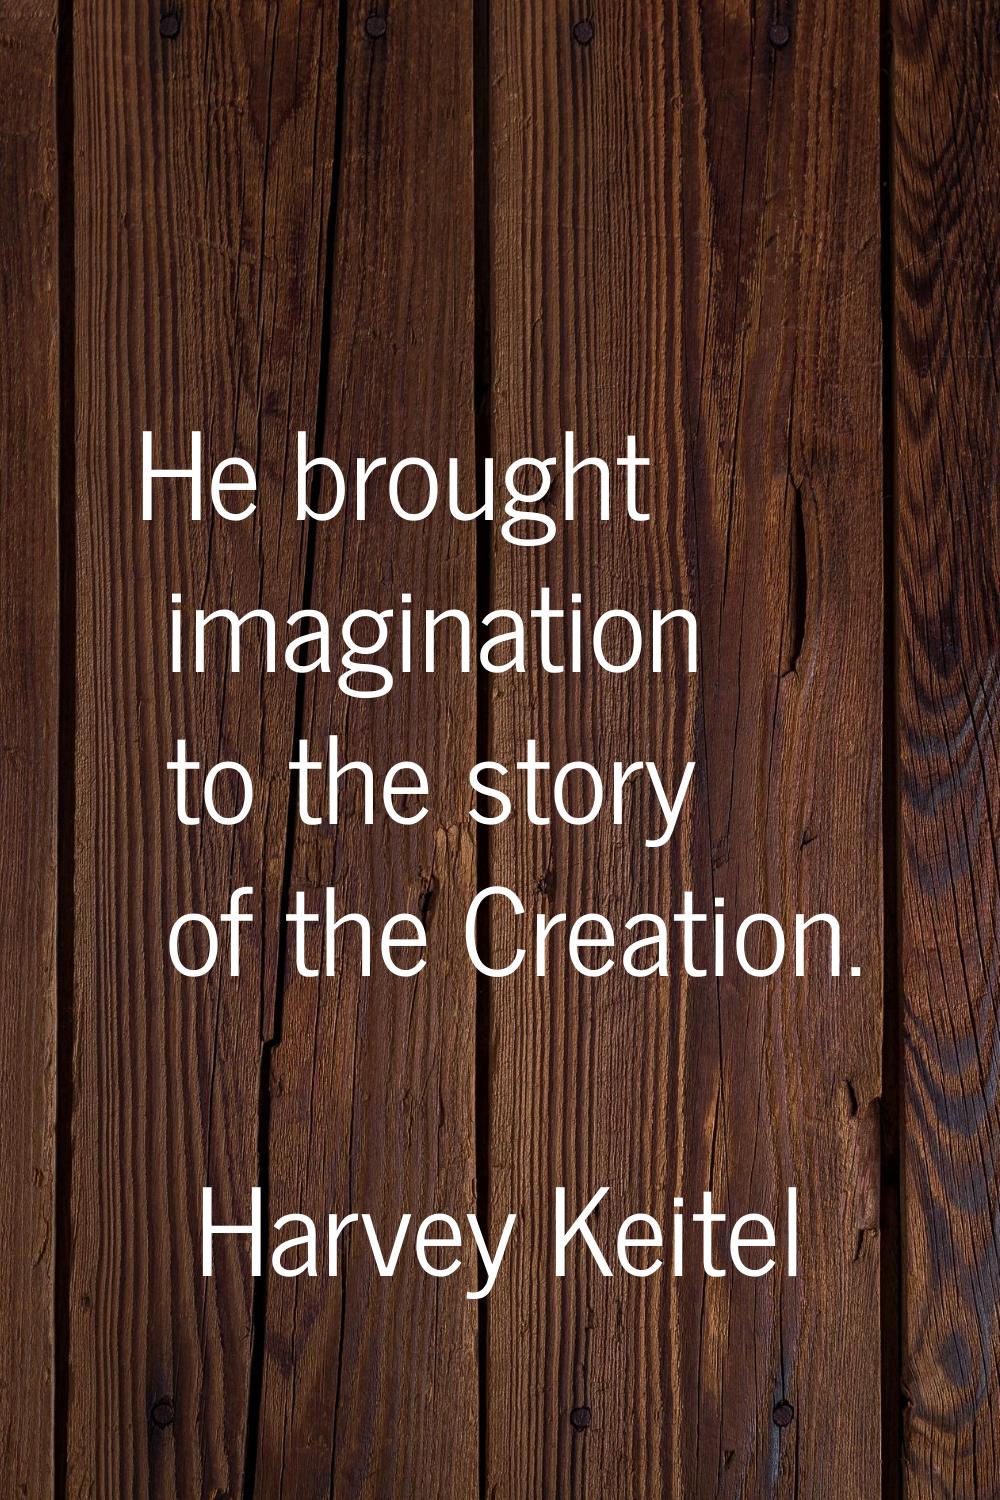 He brought imagination to the story of the Creation.